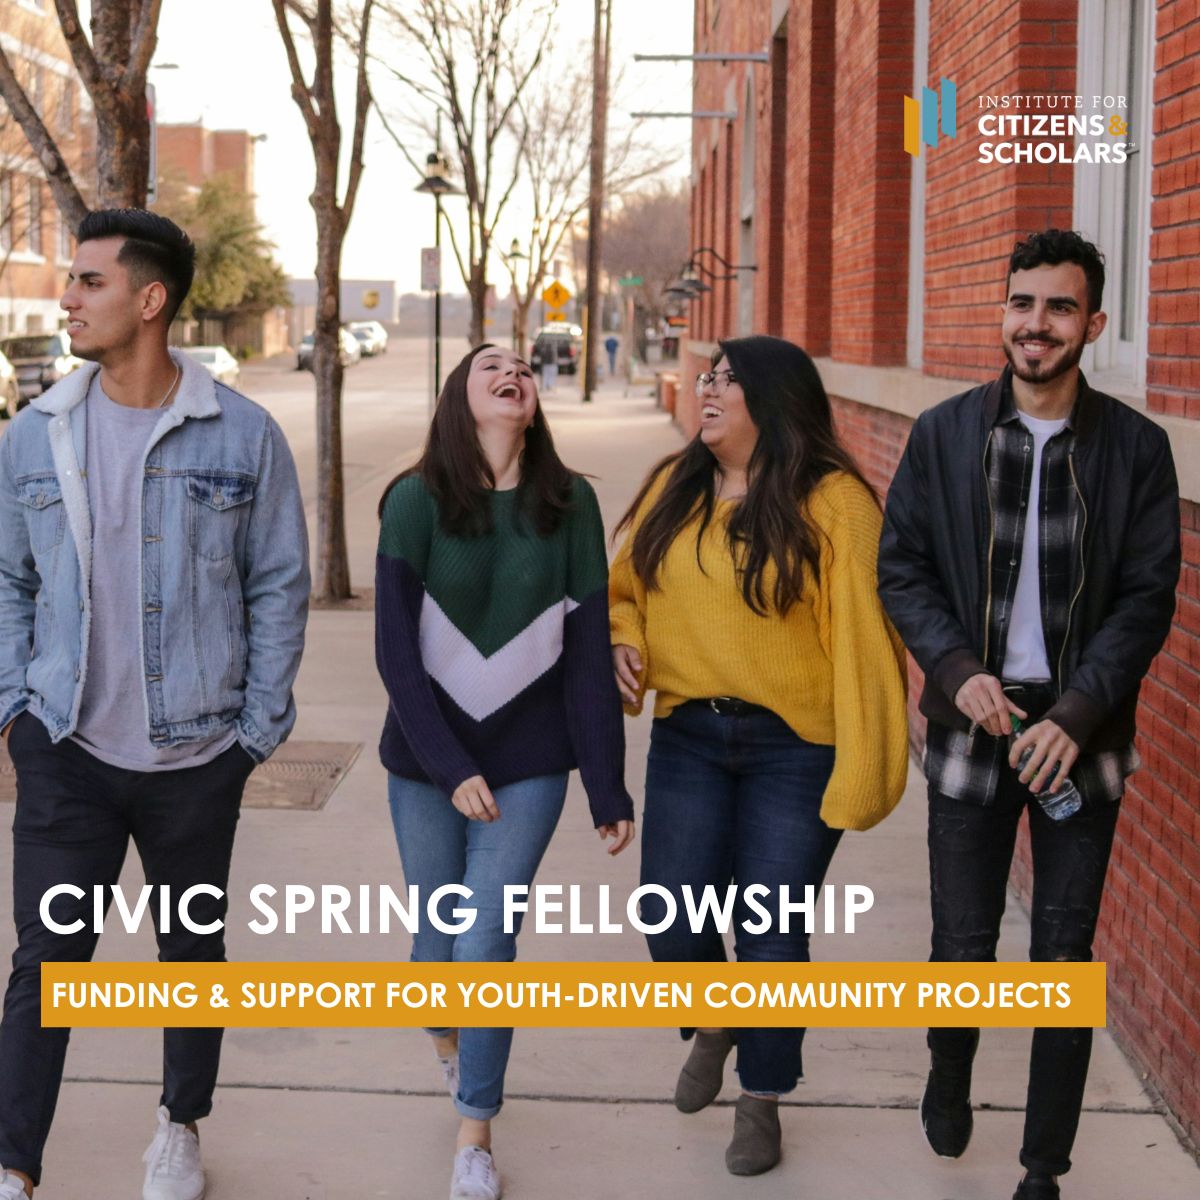 🚨 Applications are LIVE for the 2024 Civic Spring Fellowship! Are you (or a young person you know) looking to lead a community project AND get paid to do it? This summer, the Civic Spring Fellowship is funding youth-led projects from NJ. Apply now ➡️ buff.ly/3Qy0flR